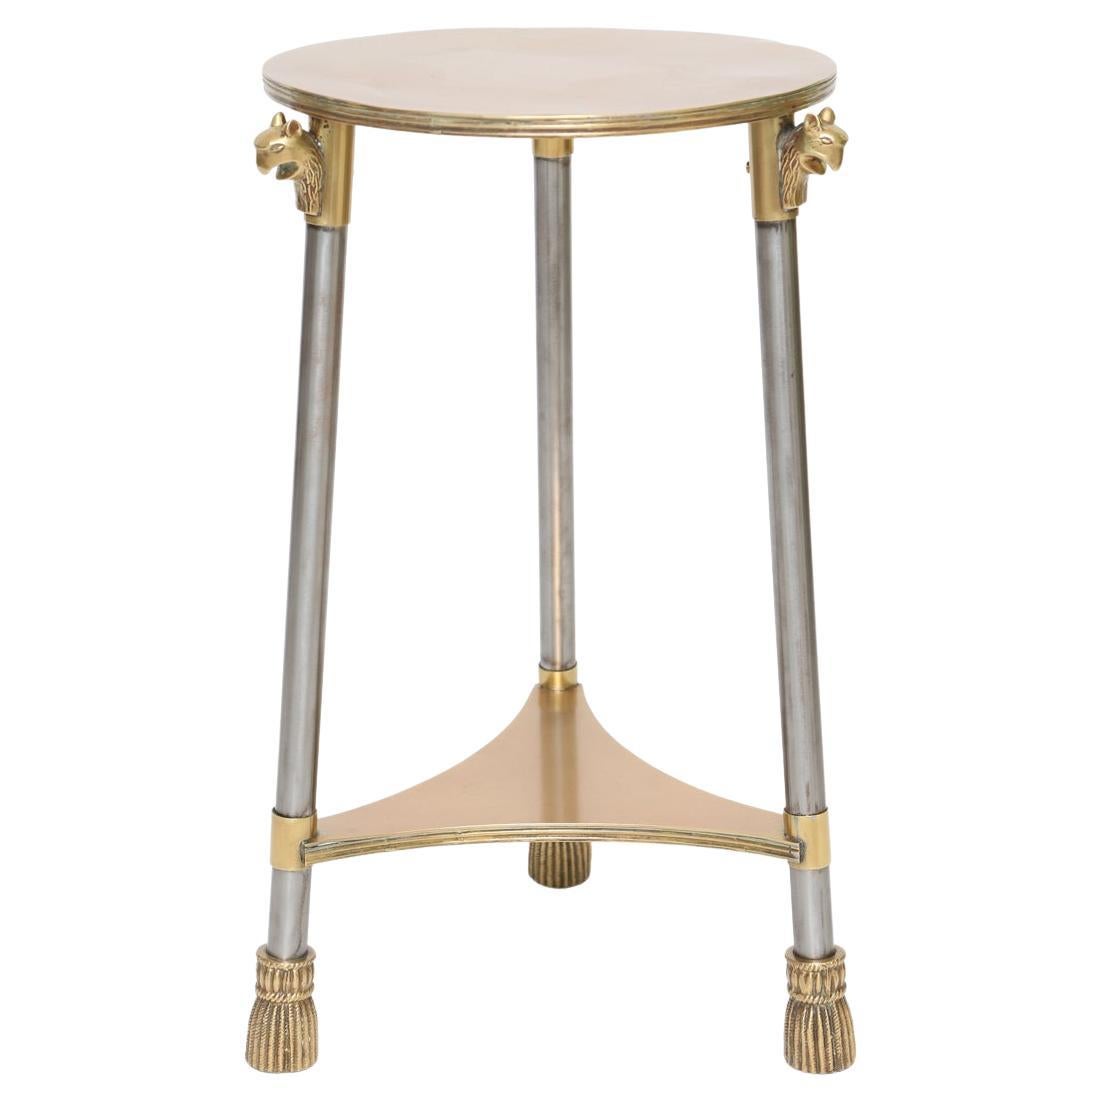 Vintage Neoclassical Occasional Table of Brass and Polished Steel